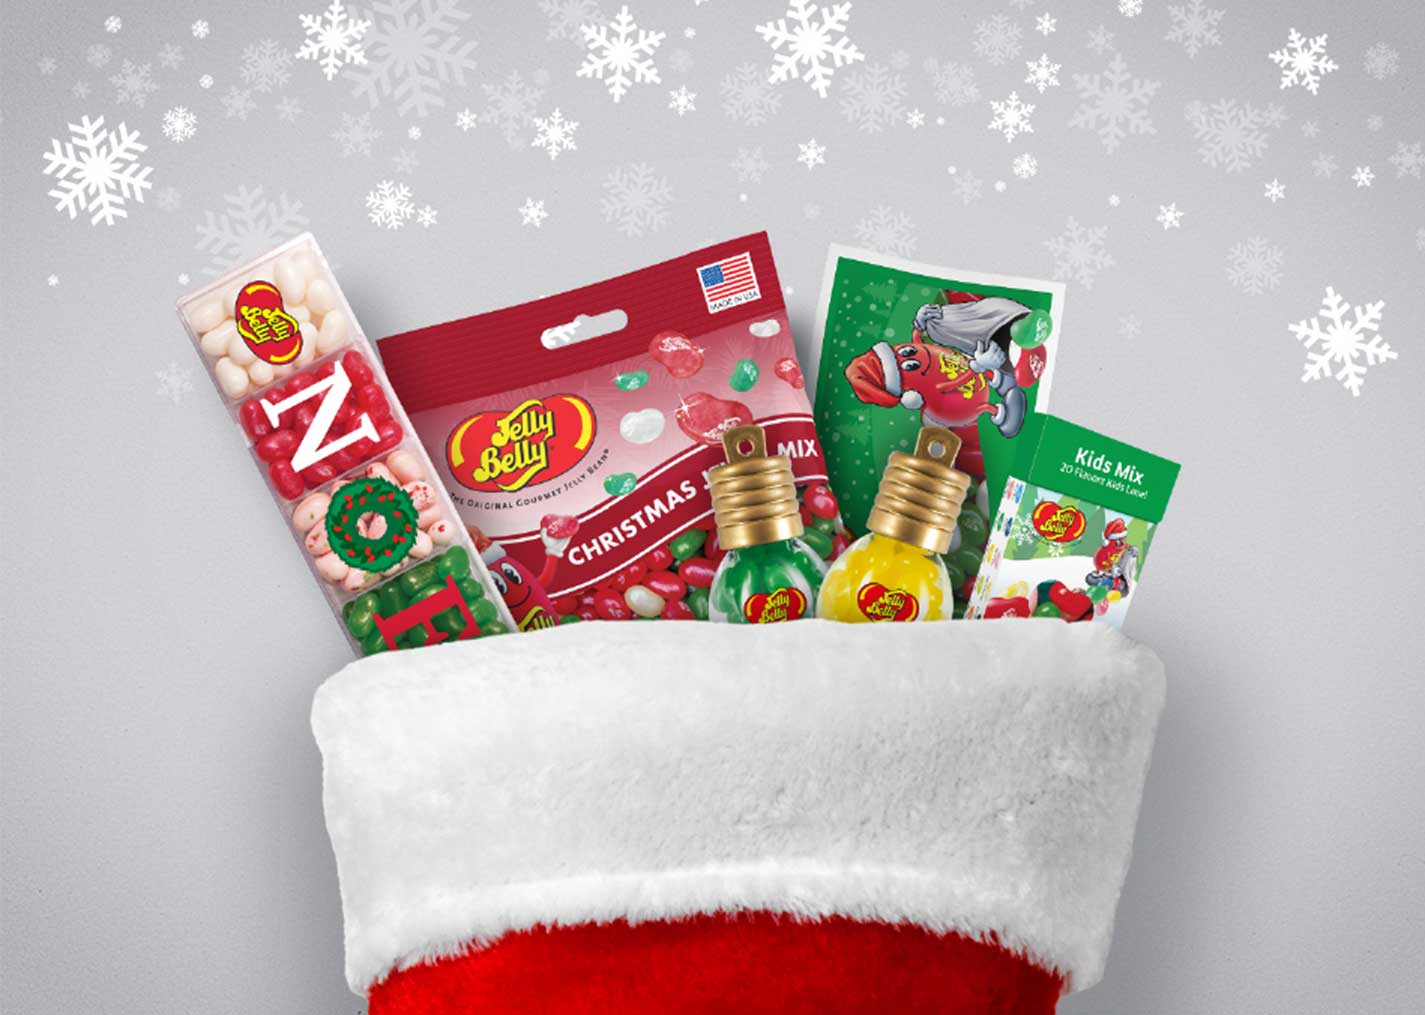 Stocking stuffed with Jelly Belly product items